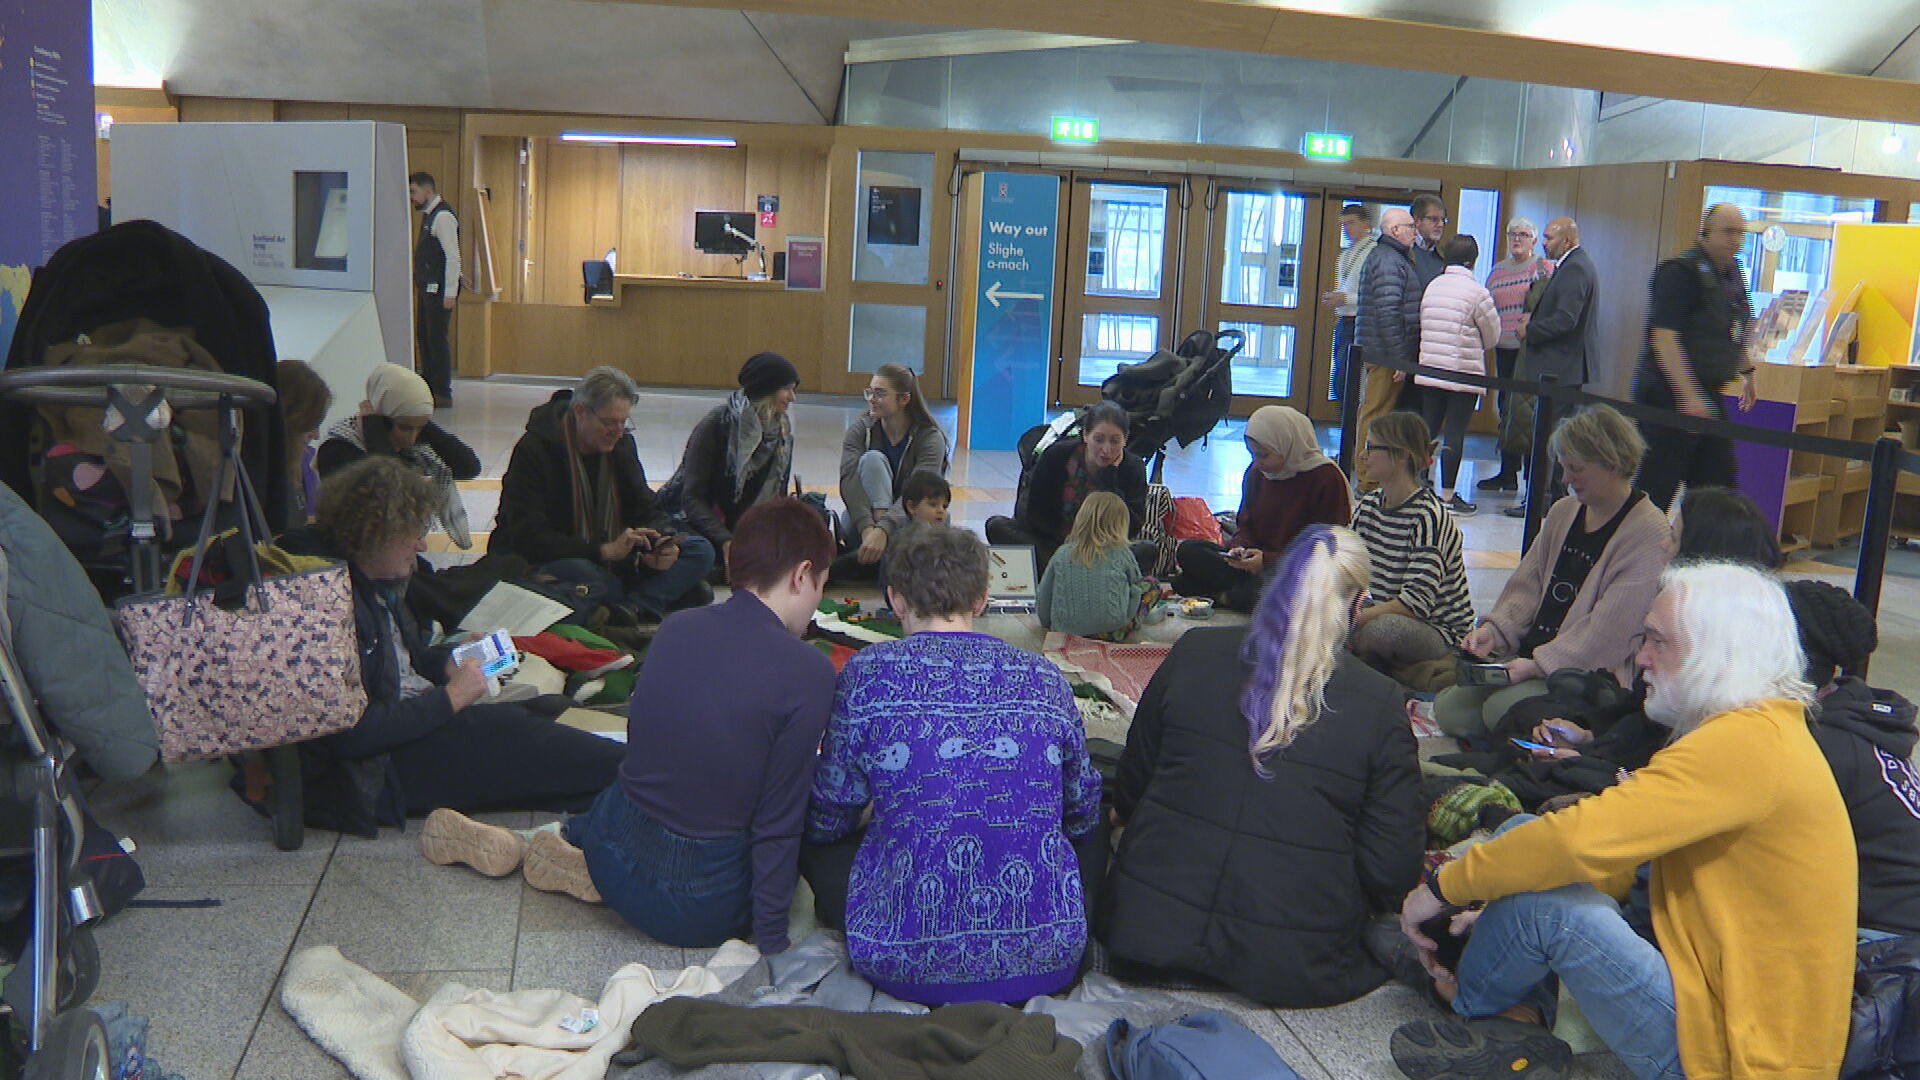 Pro-Palestinian protesters stage sit-in at Scottish Parliament.